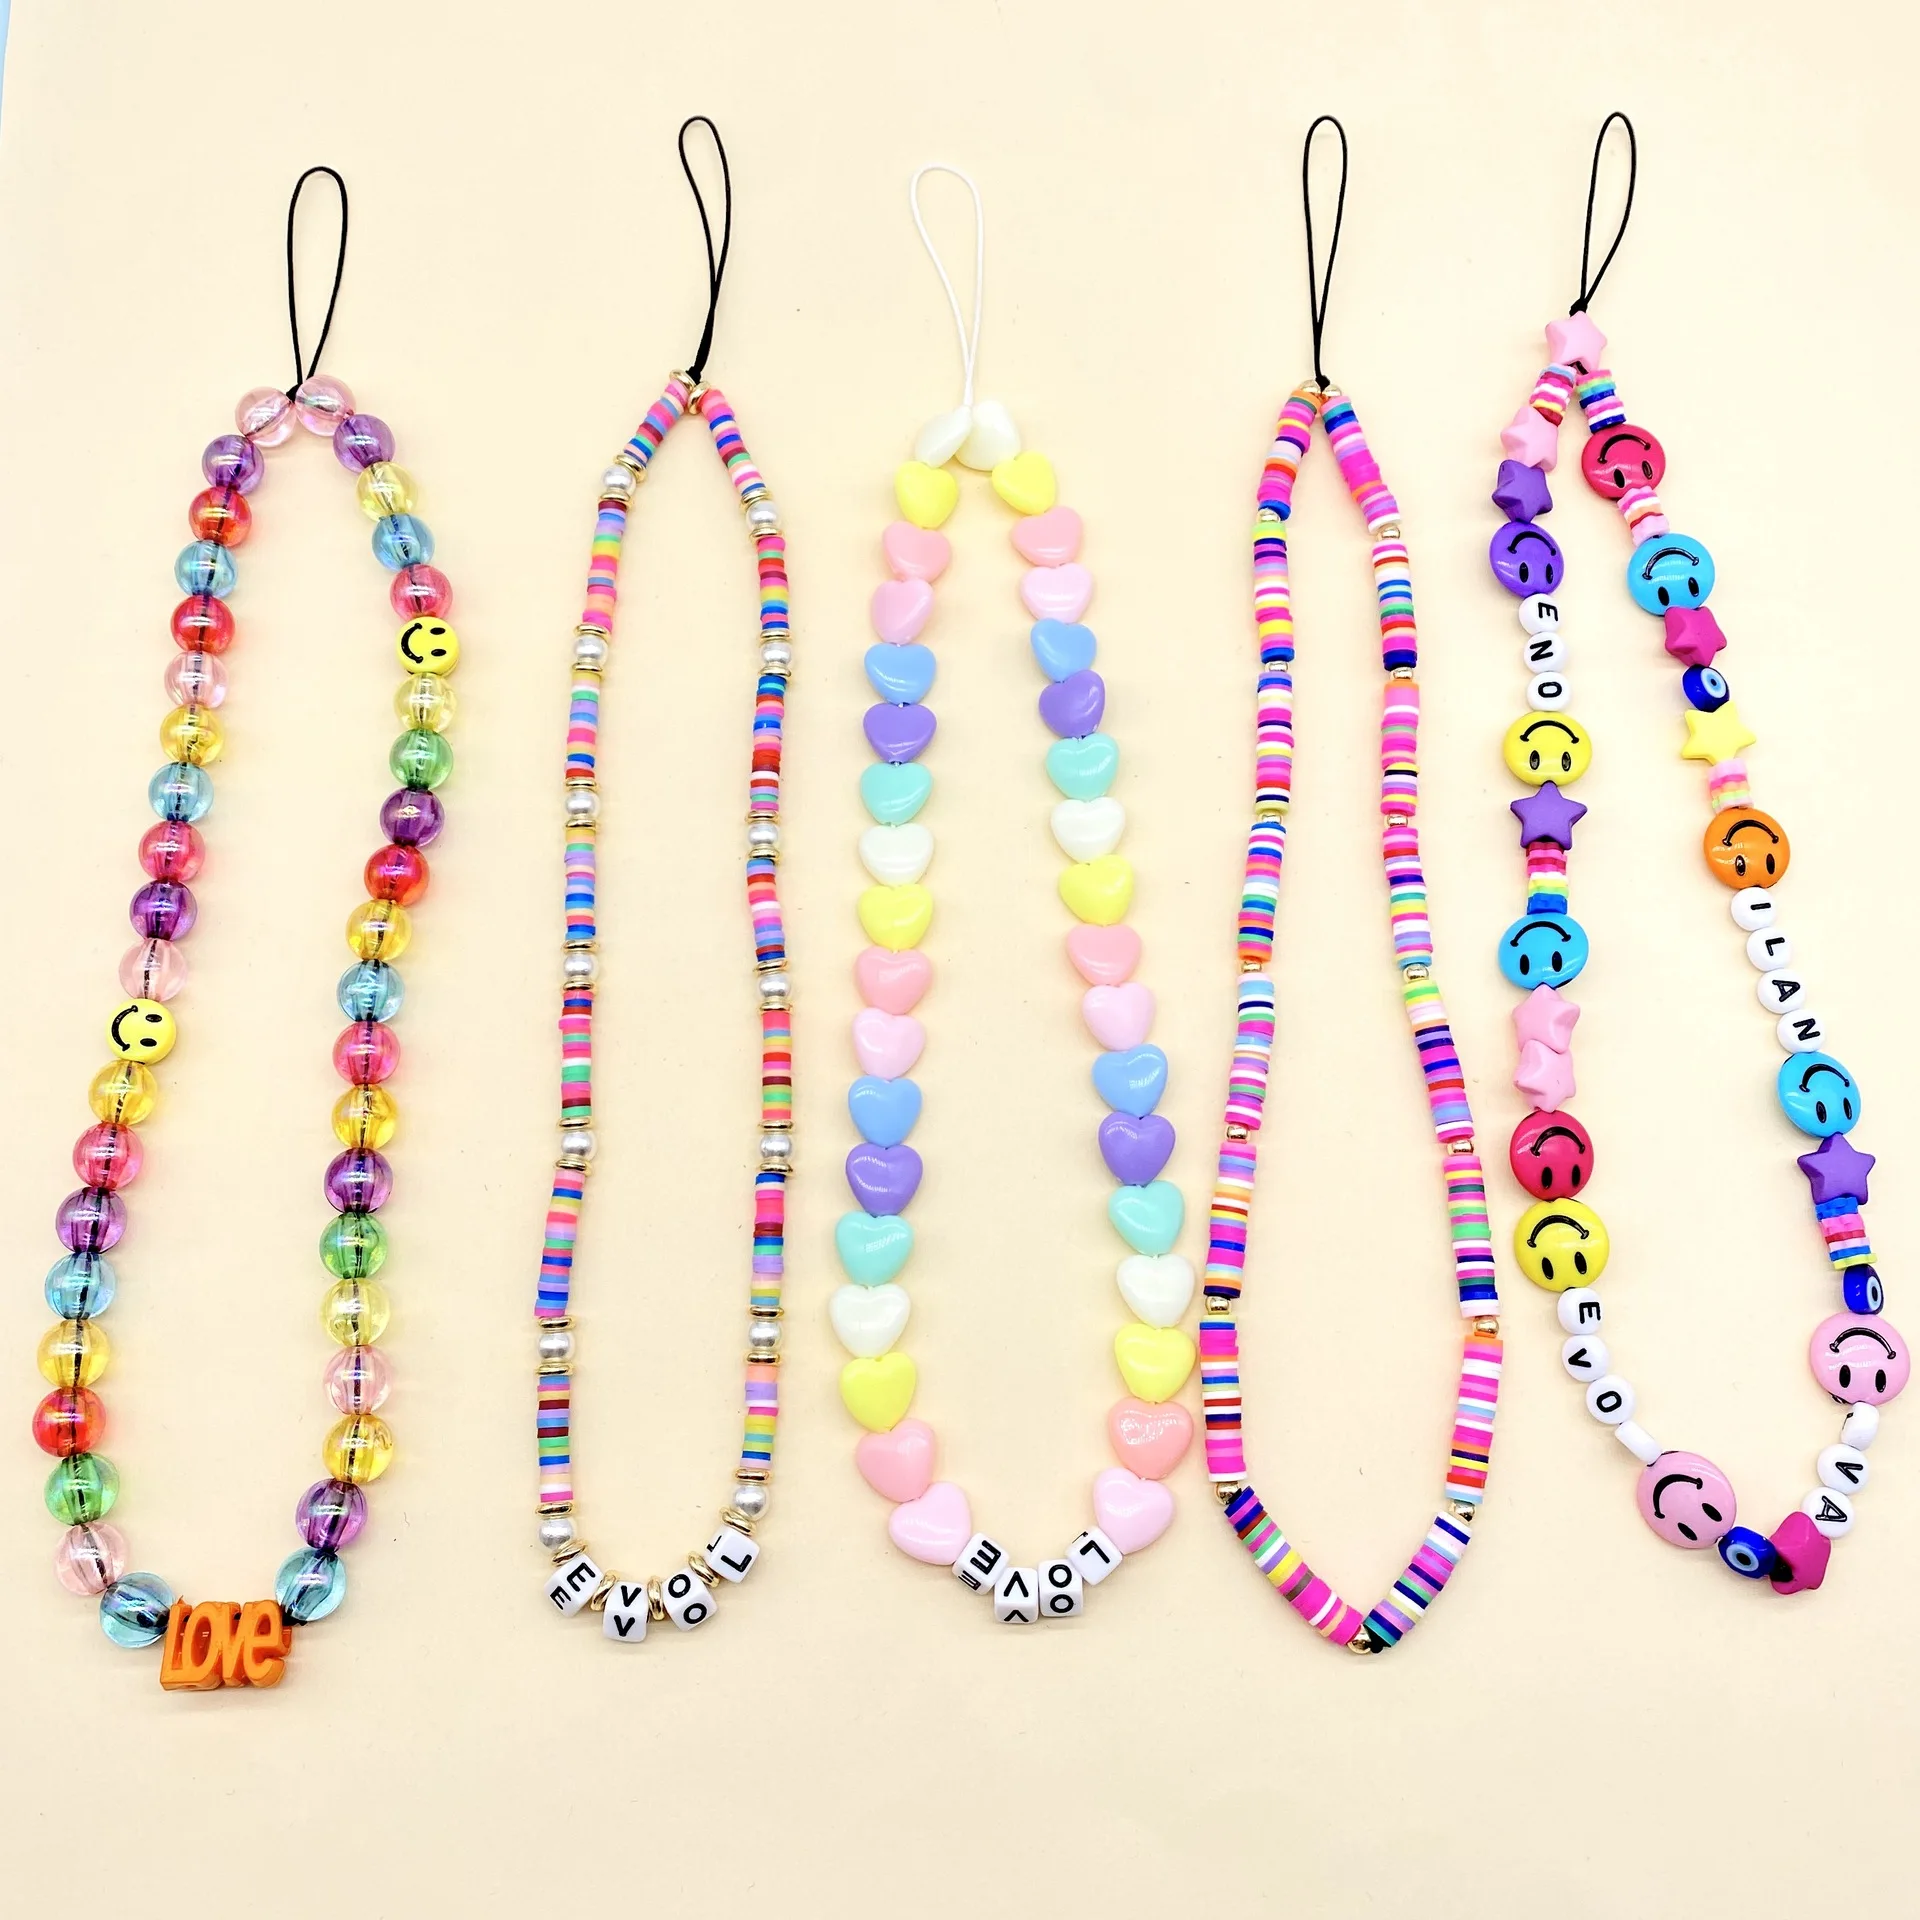 

2021 New Fashion Handmade Beaded Phone Charms Strap Acrylic Polymer Clay Beads Pearl Smiley Face Star Phone Lanyard Accessory, Colorful